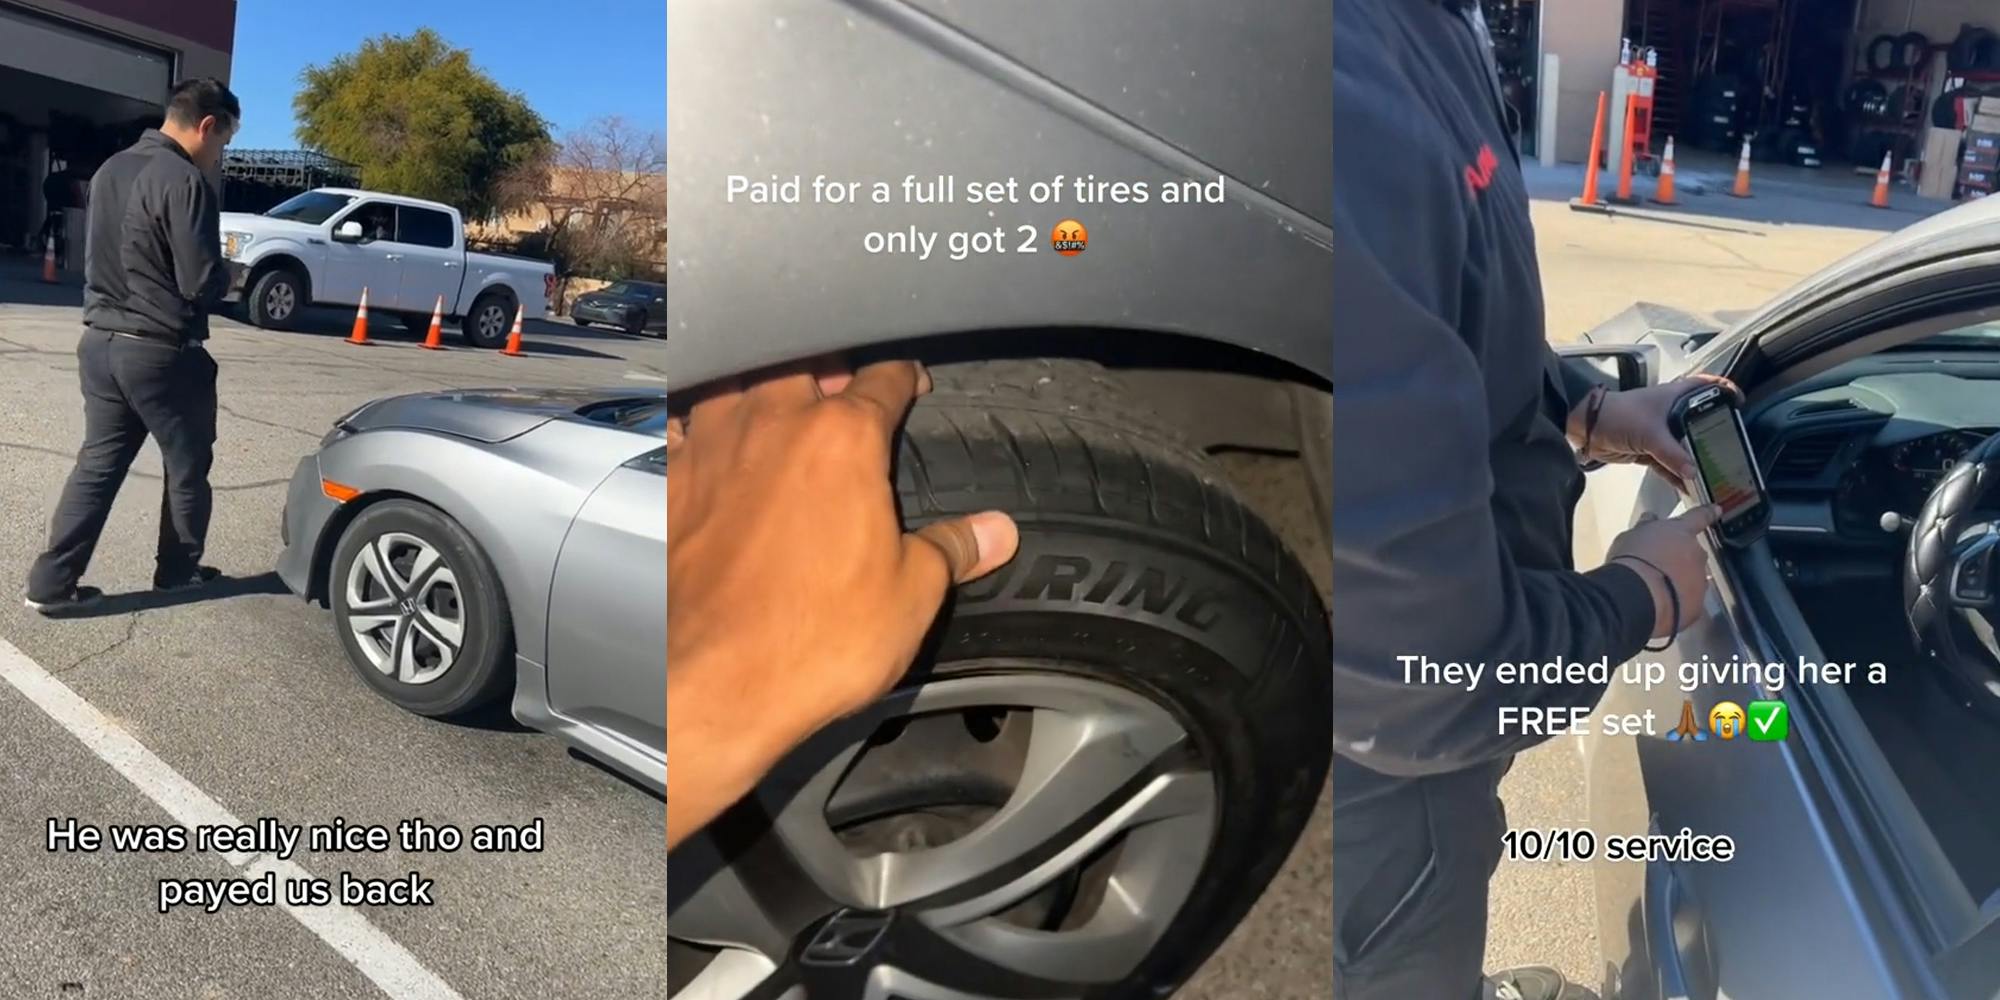 man walking next to car in parking lot caption "He was really nice tho and payed us back" (l) man hand on tire caption "Paid for a full set of tires and only got 2" (c) man tapping on screen in hand in car window caption "They ended up giving her a FREE set 10/10 service" (r)